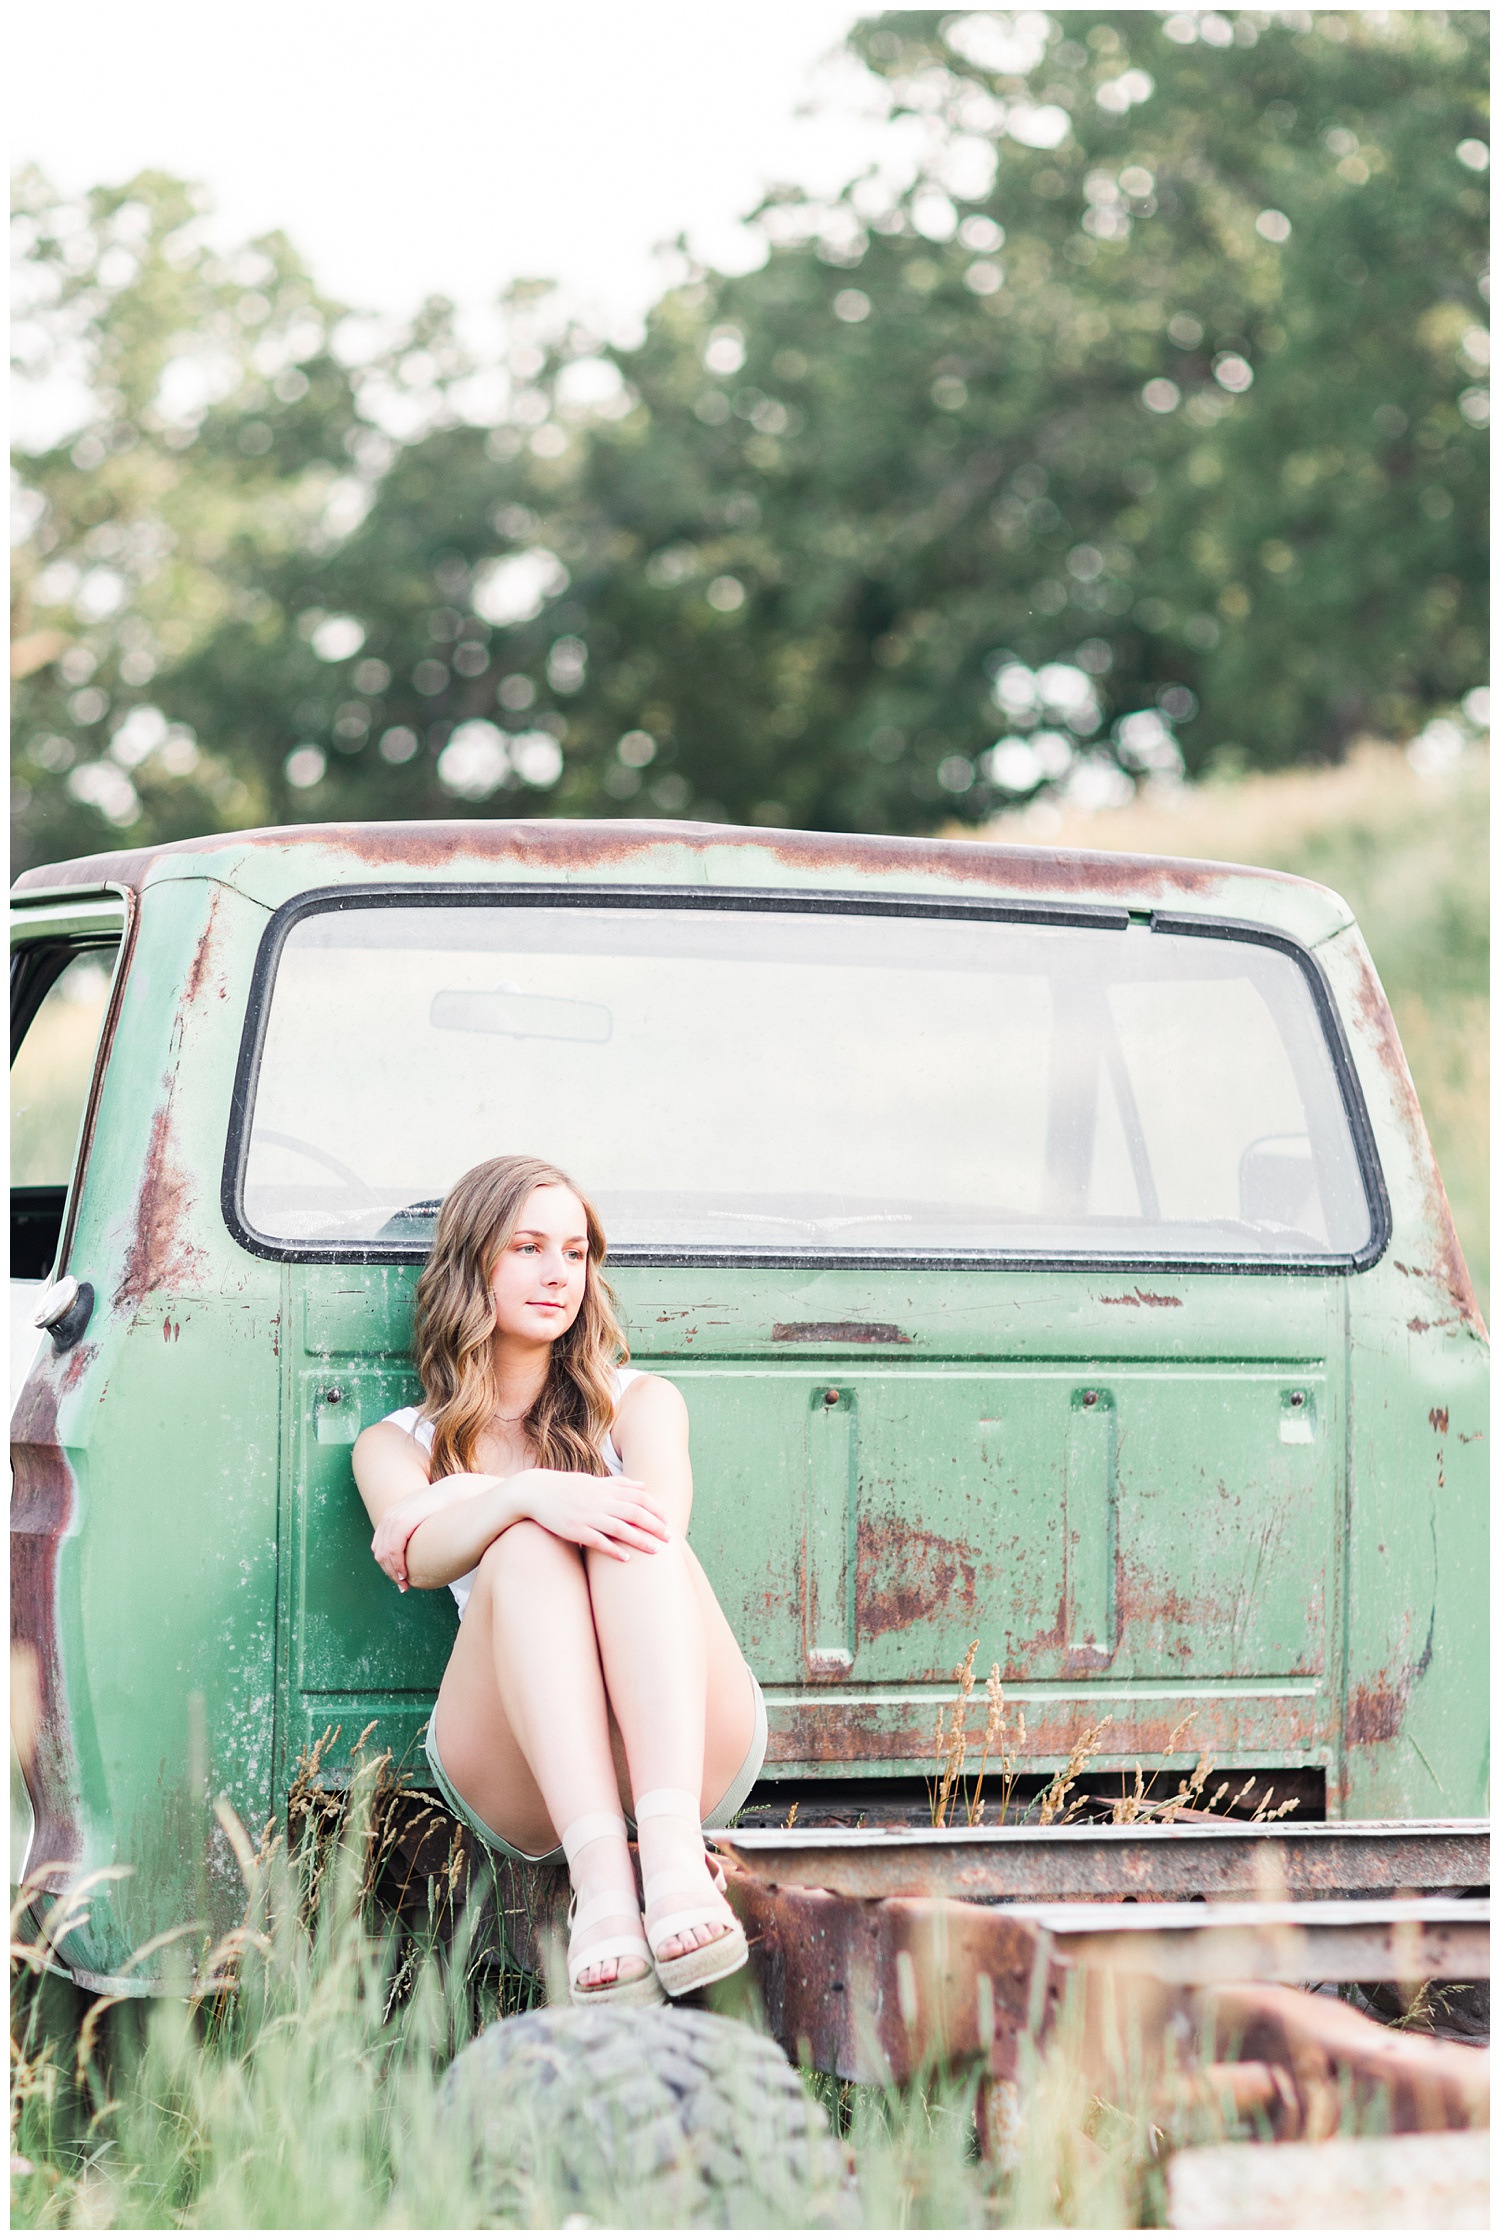 Senior Taylor sitting in the back of an old green Ford truck in a grassy field | CB Studio